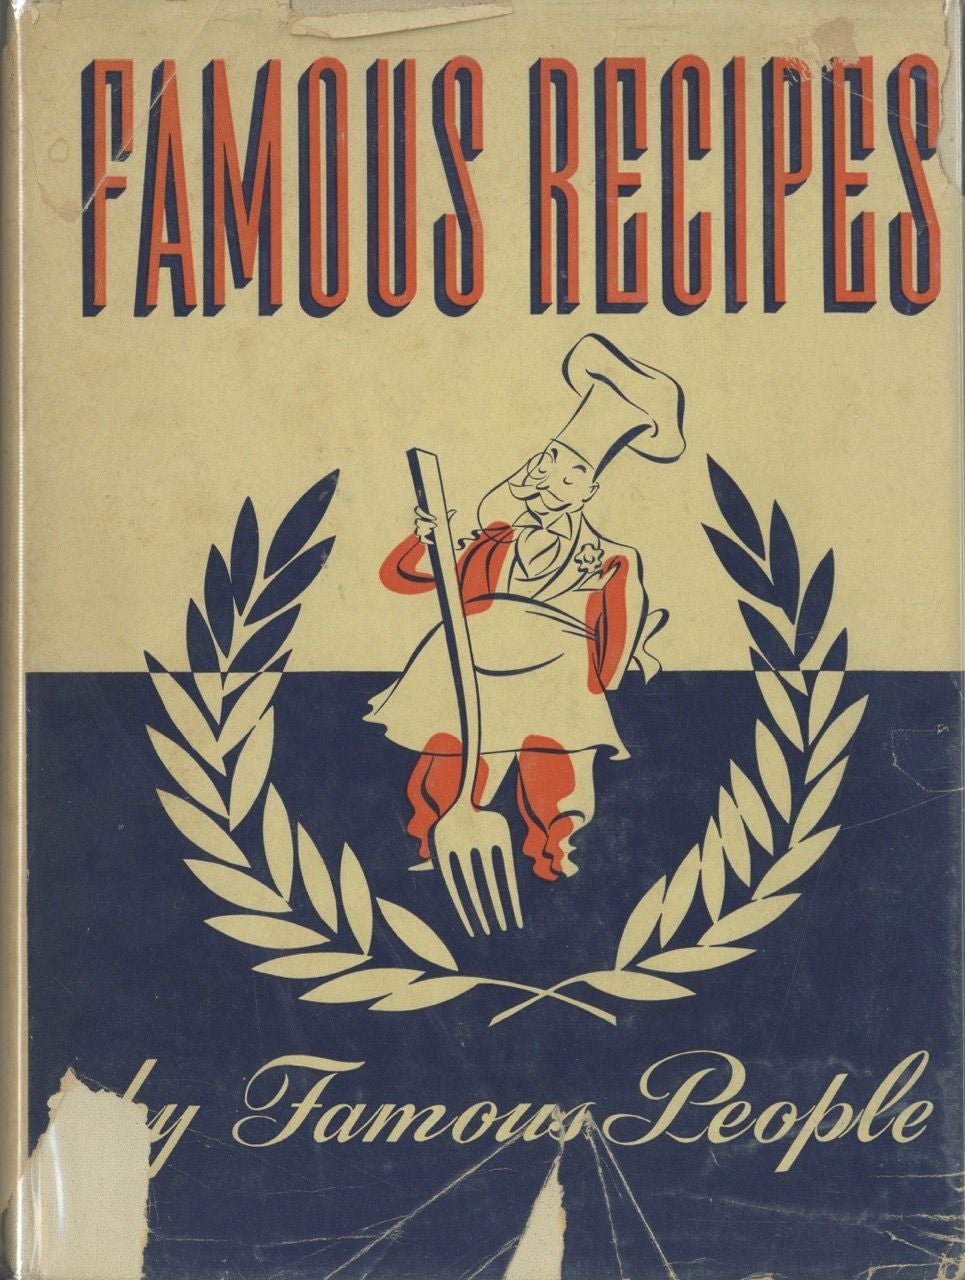 Item #5824 Famous Recipes By Famous People. Compiled and edited by Herbert Cerwin. Illustrated by Sinclair Ross. Robinson Jeffers John Steinbeck, Rube Goldberg, Sinclair Lewis, Sherwood Anderson, William Beebe, Gertrude Stein, Disney, Walt, Edgar Rice Burroughs, H. L. Mencken, Zane Grey, Sunset Magazine in Cooperation, Hotel Del Monte, Herbert Cerwin, compiler and.